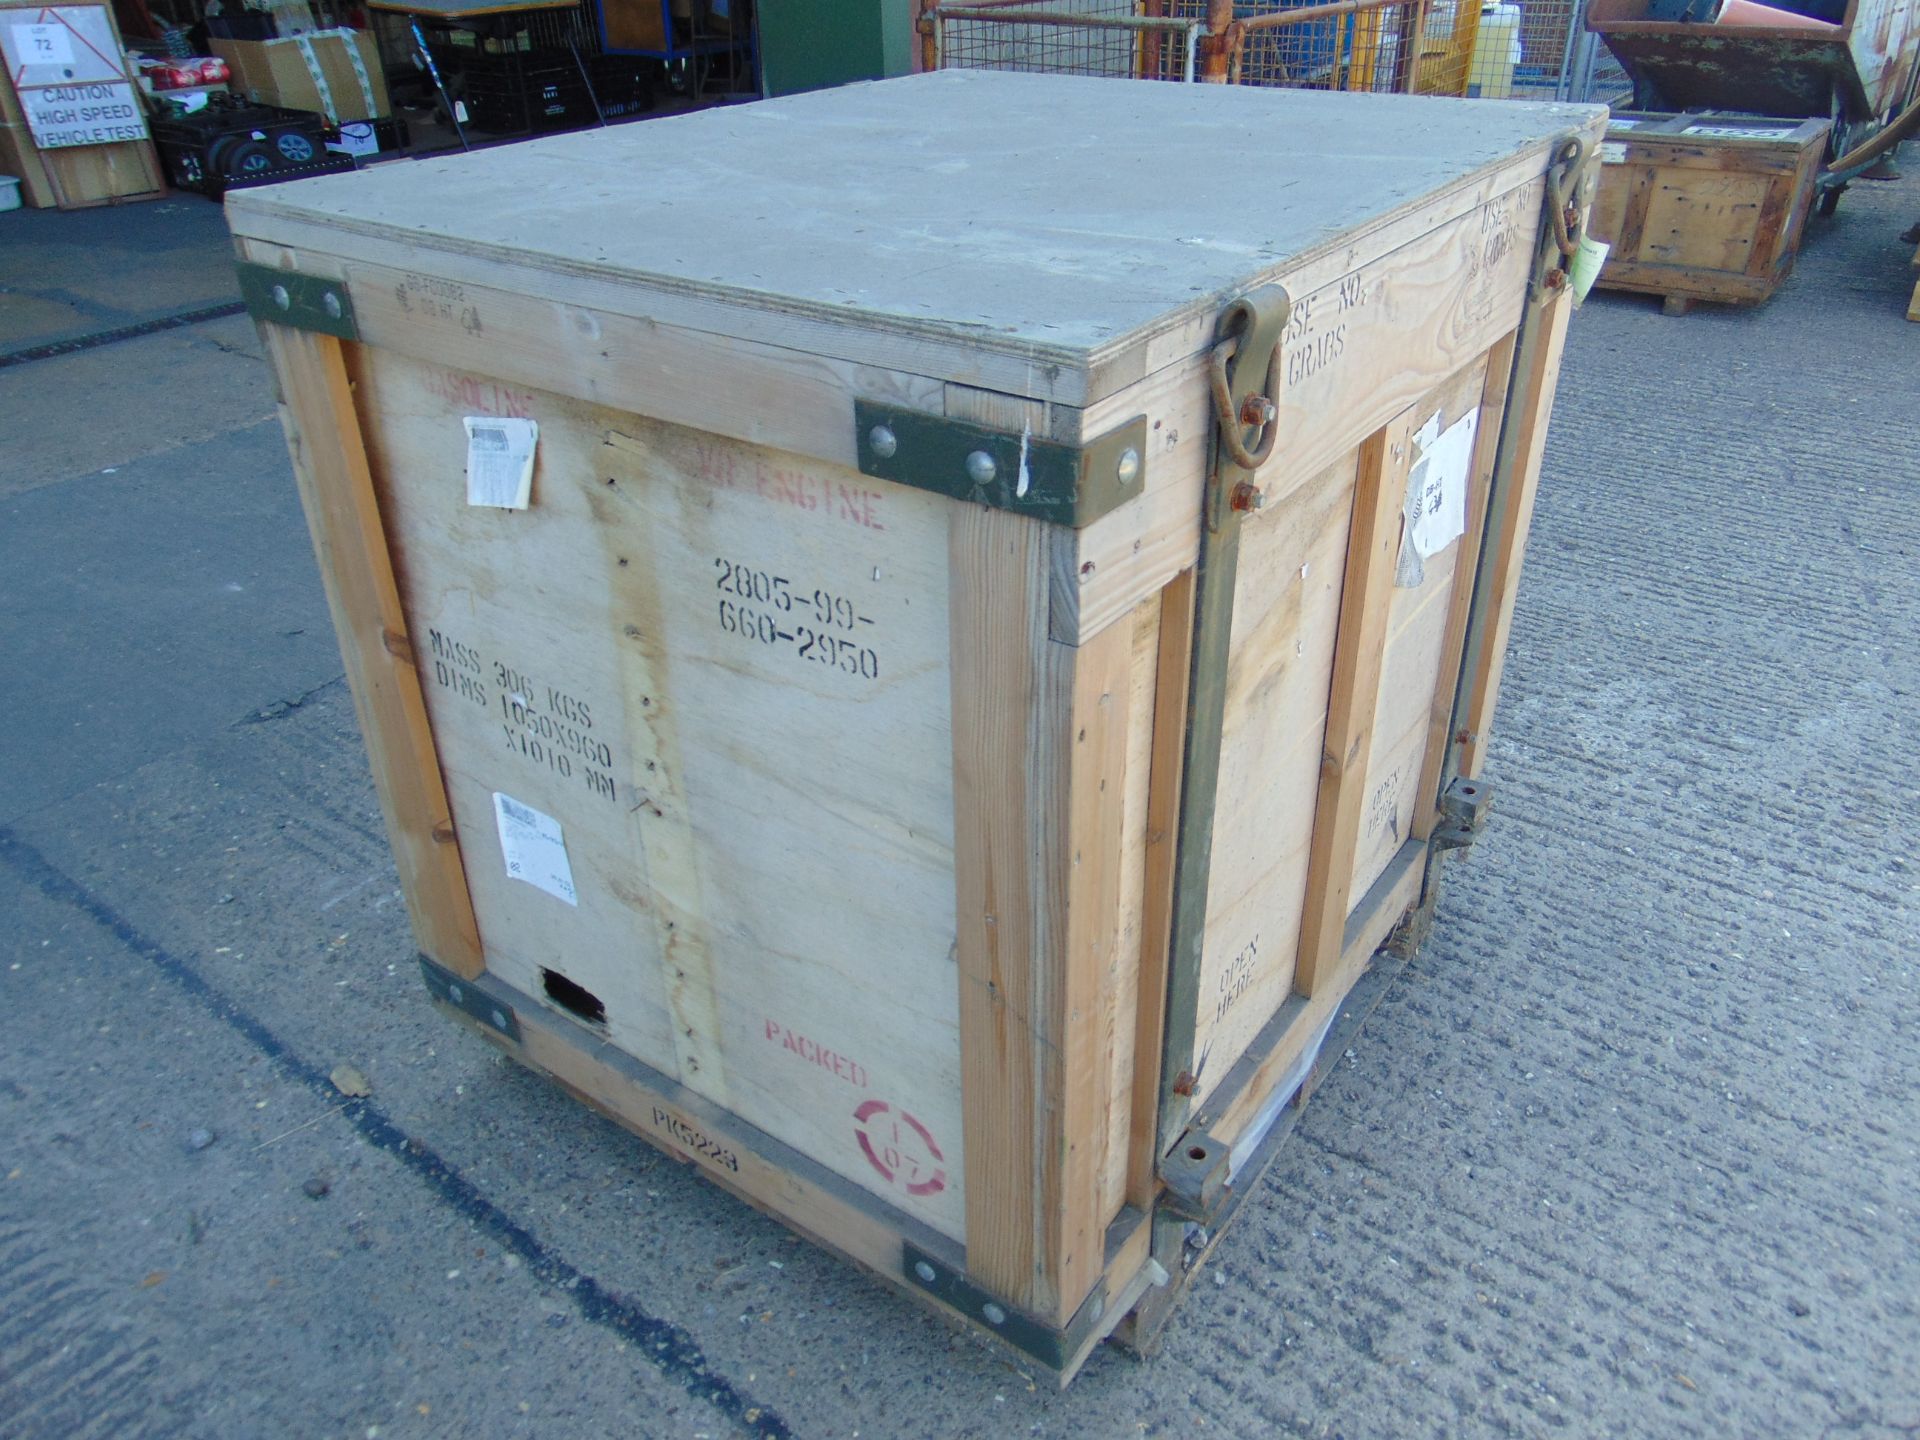 Fully Reconditioned Land Rover V8 Engine c/w all Accessories, as shown in Crate etc - Image 20 of 21